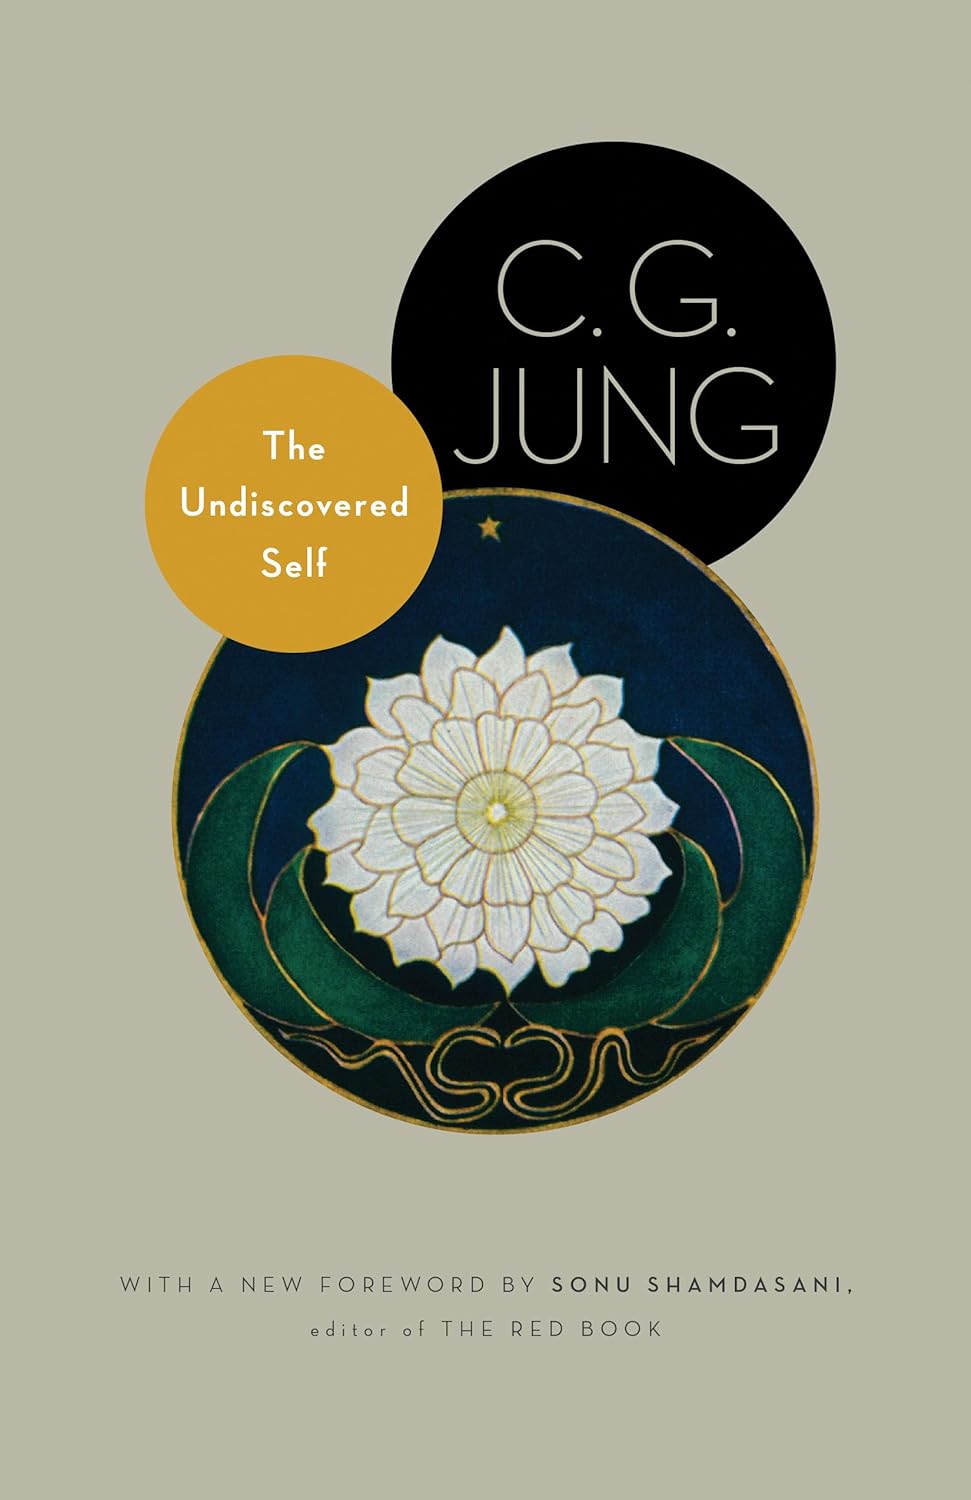 The Undiscovered Self by C. G. Jung